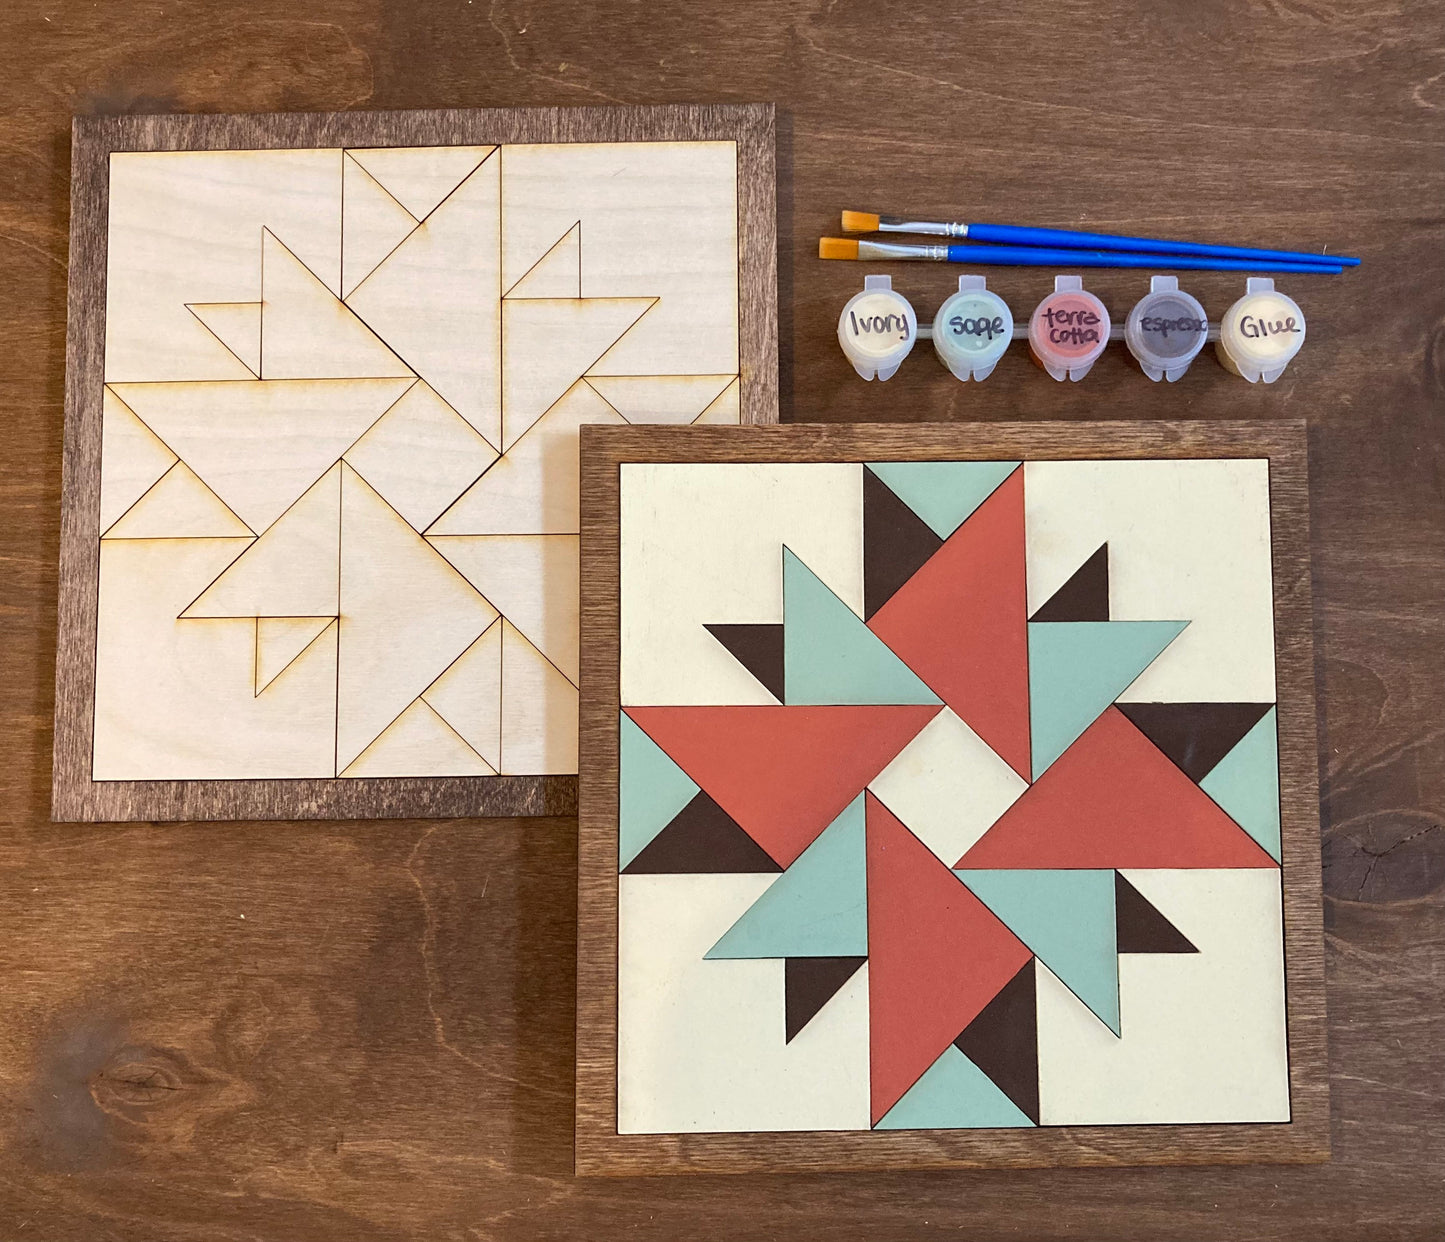 DIY Barn Quilt Painting Kit, DIY Mosaic Craft, Barn Quilt Kit, Paint at Home, Gift for Her, Crafts for Adults, DIY for Teens, Gift for Him